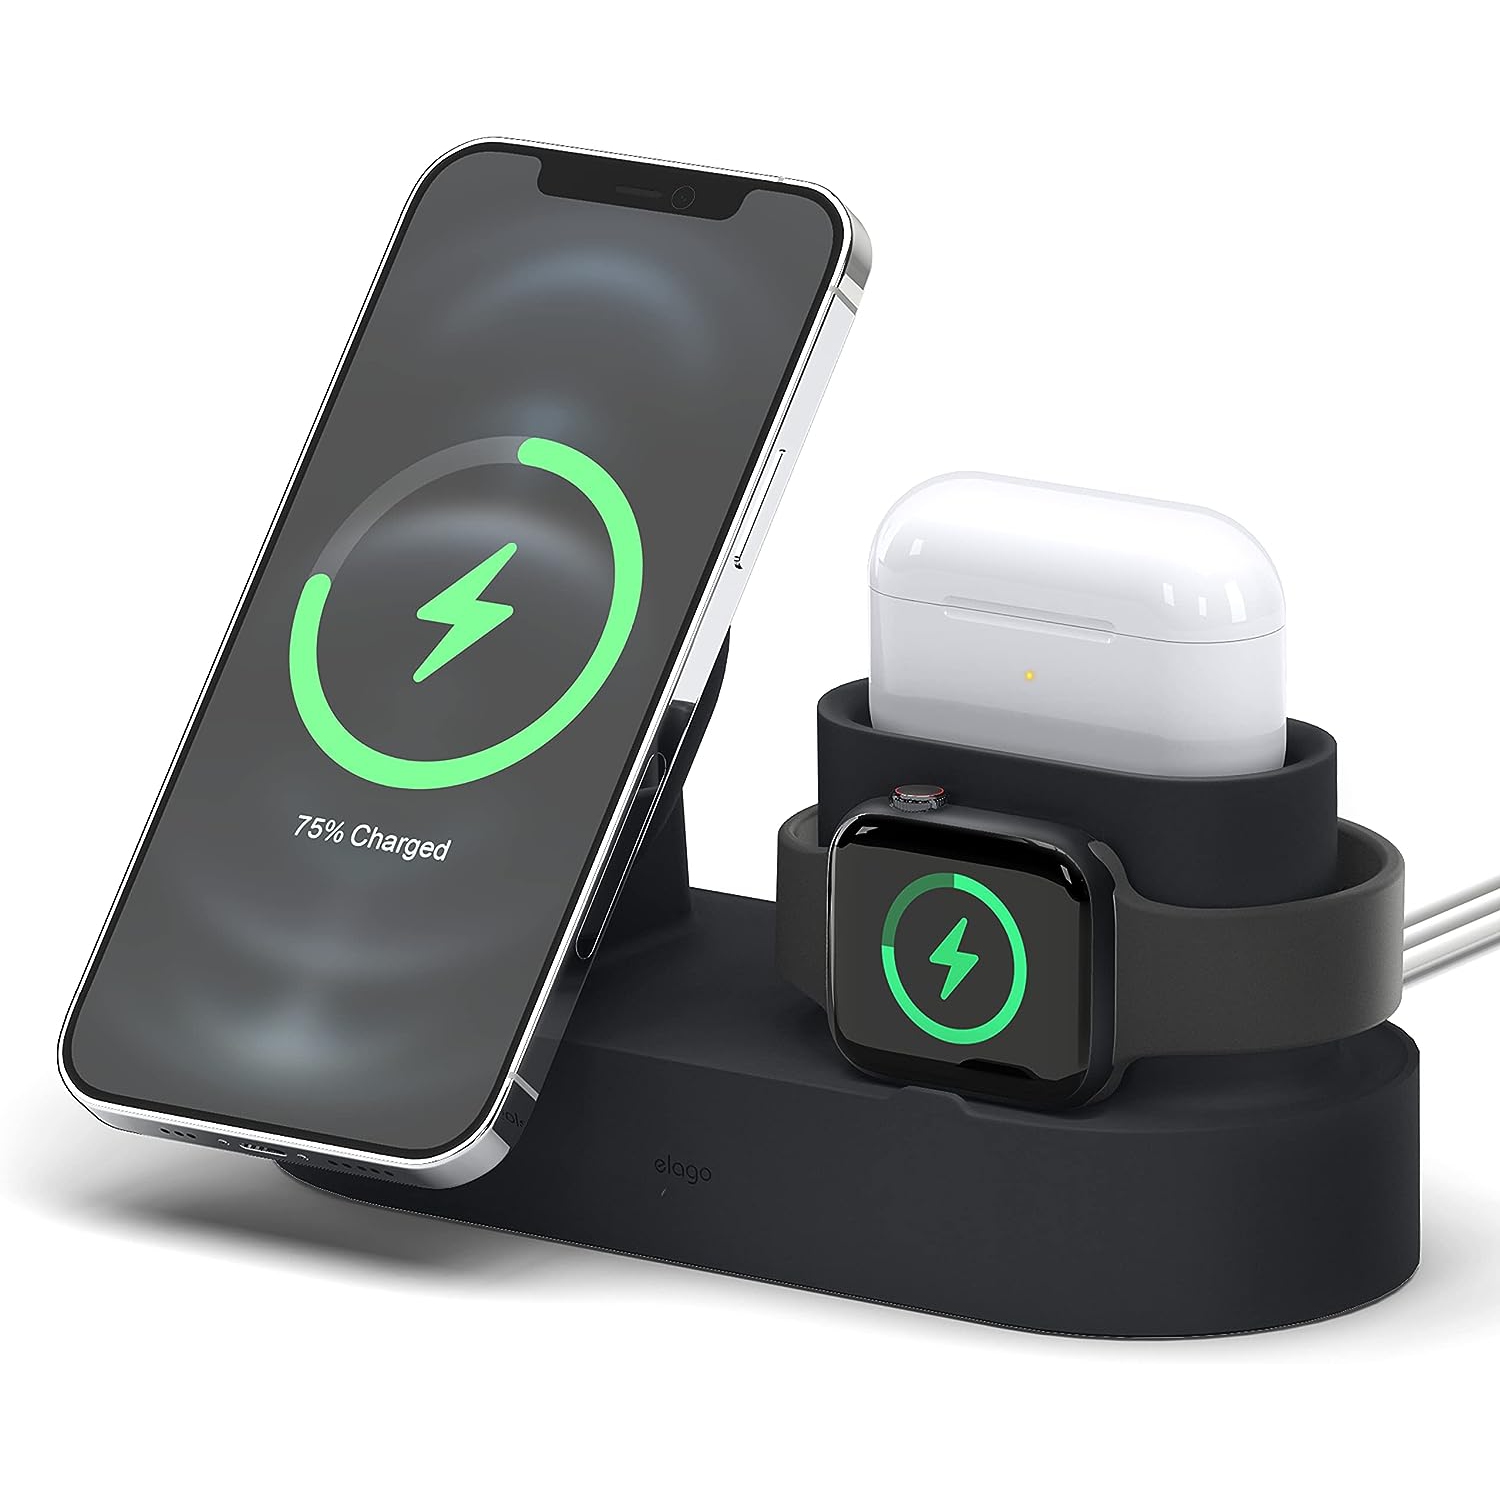 elago Trio 2 Wireless Charging Station for Desk Compatible with MagSafe, iPhone 12, AirPods Pro - 3 in 1 Phone Stand [Black] [Charging Cables Not Included]